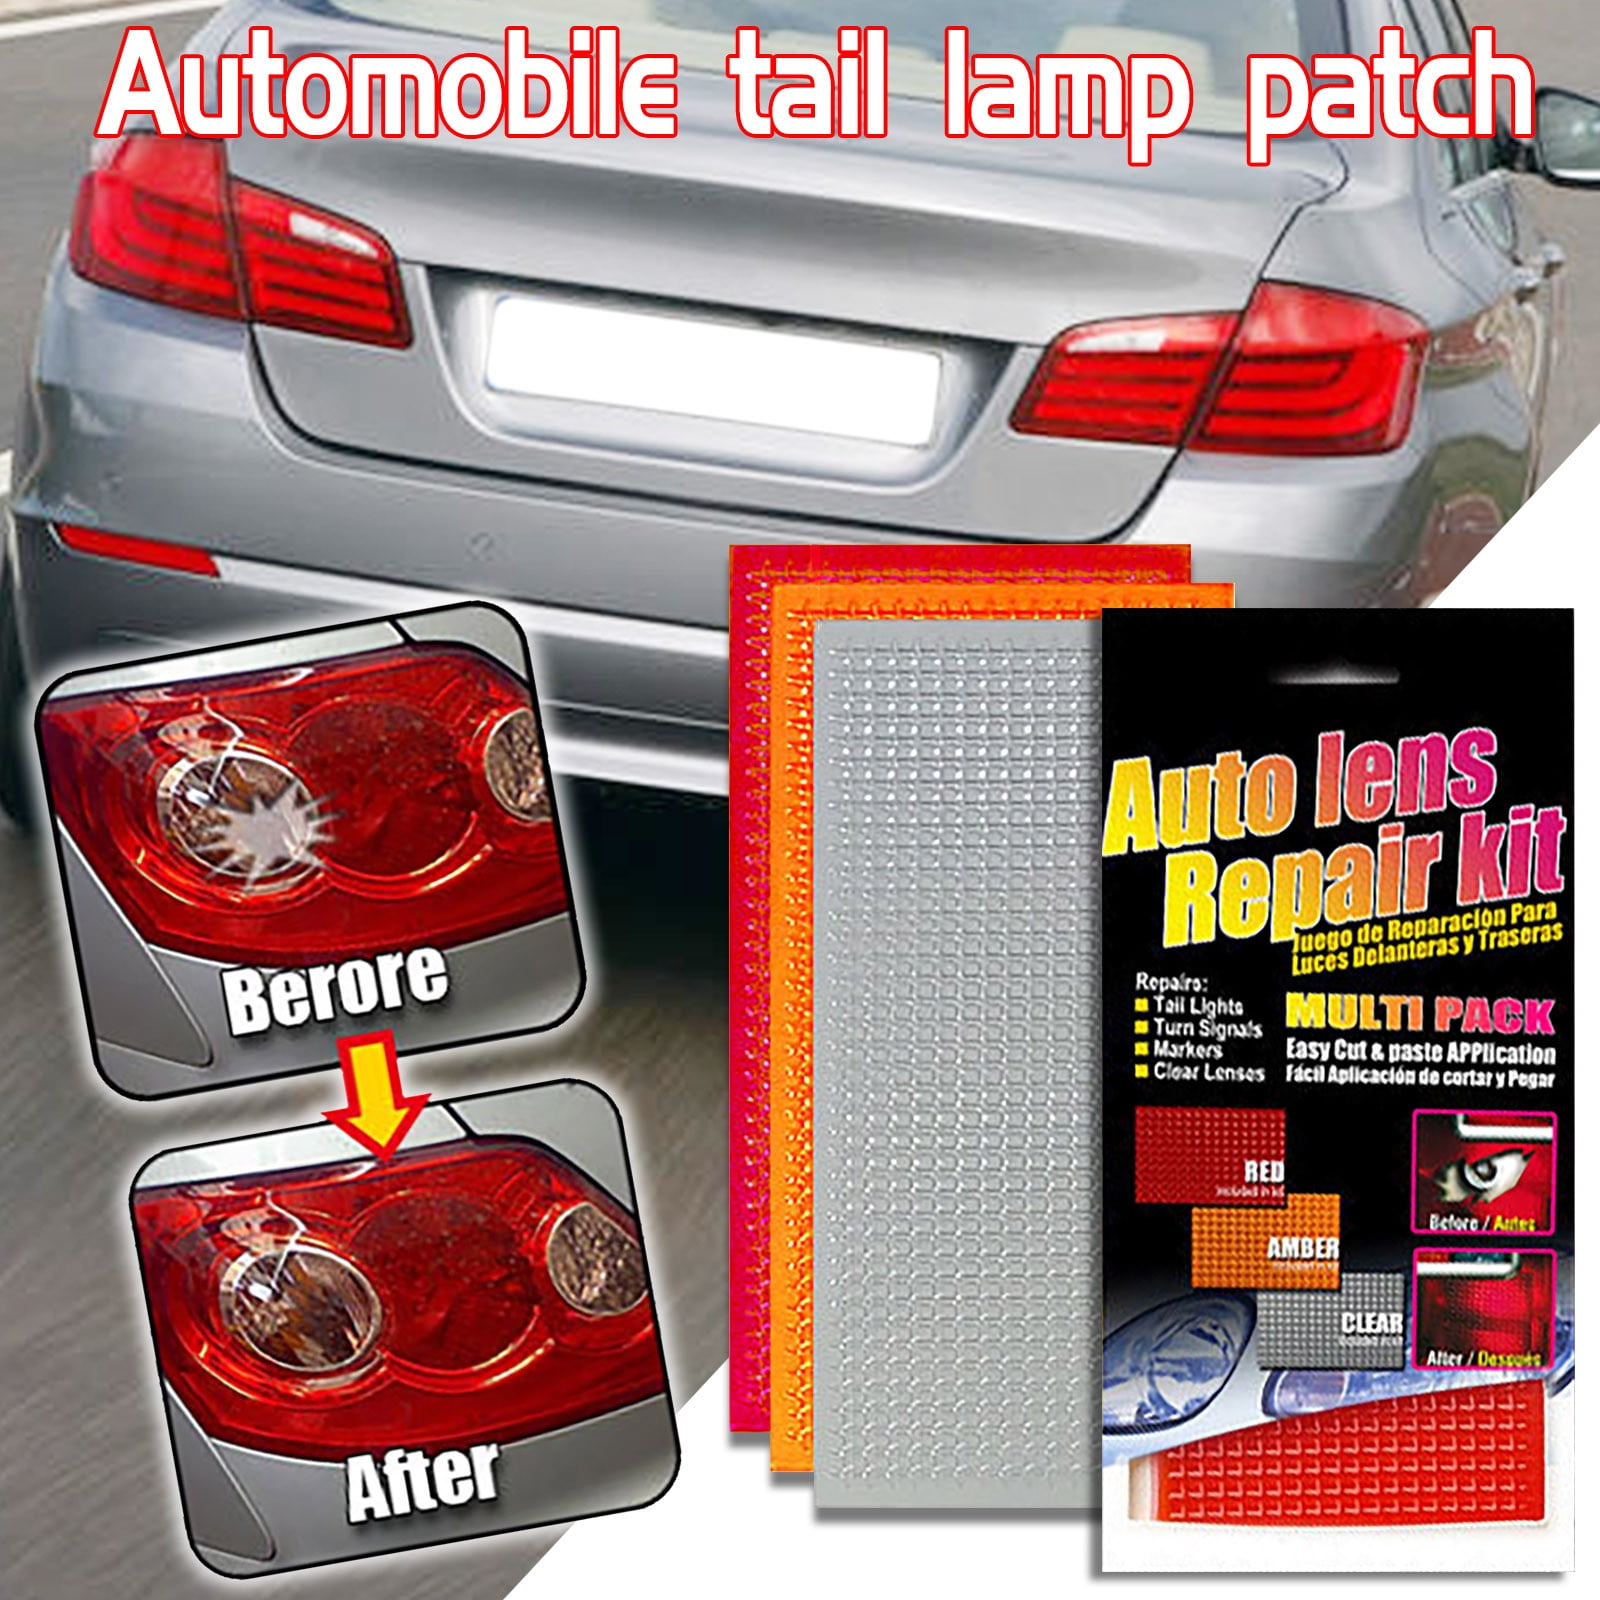 Car tail light cover replacement with amazing skill  Car tail light  repairing with very basic tools 